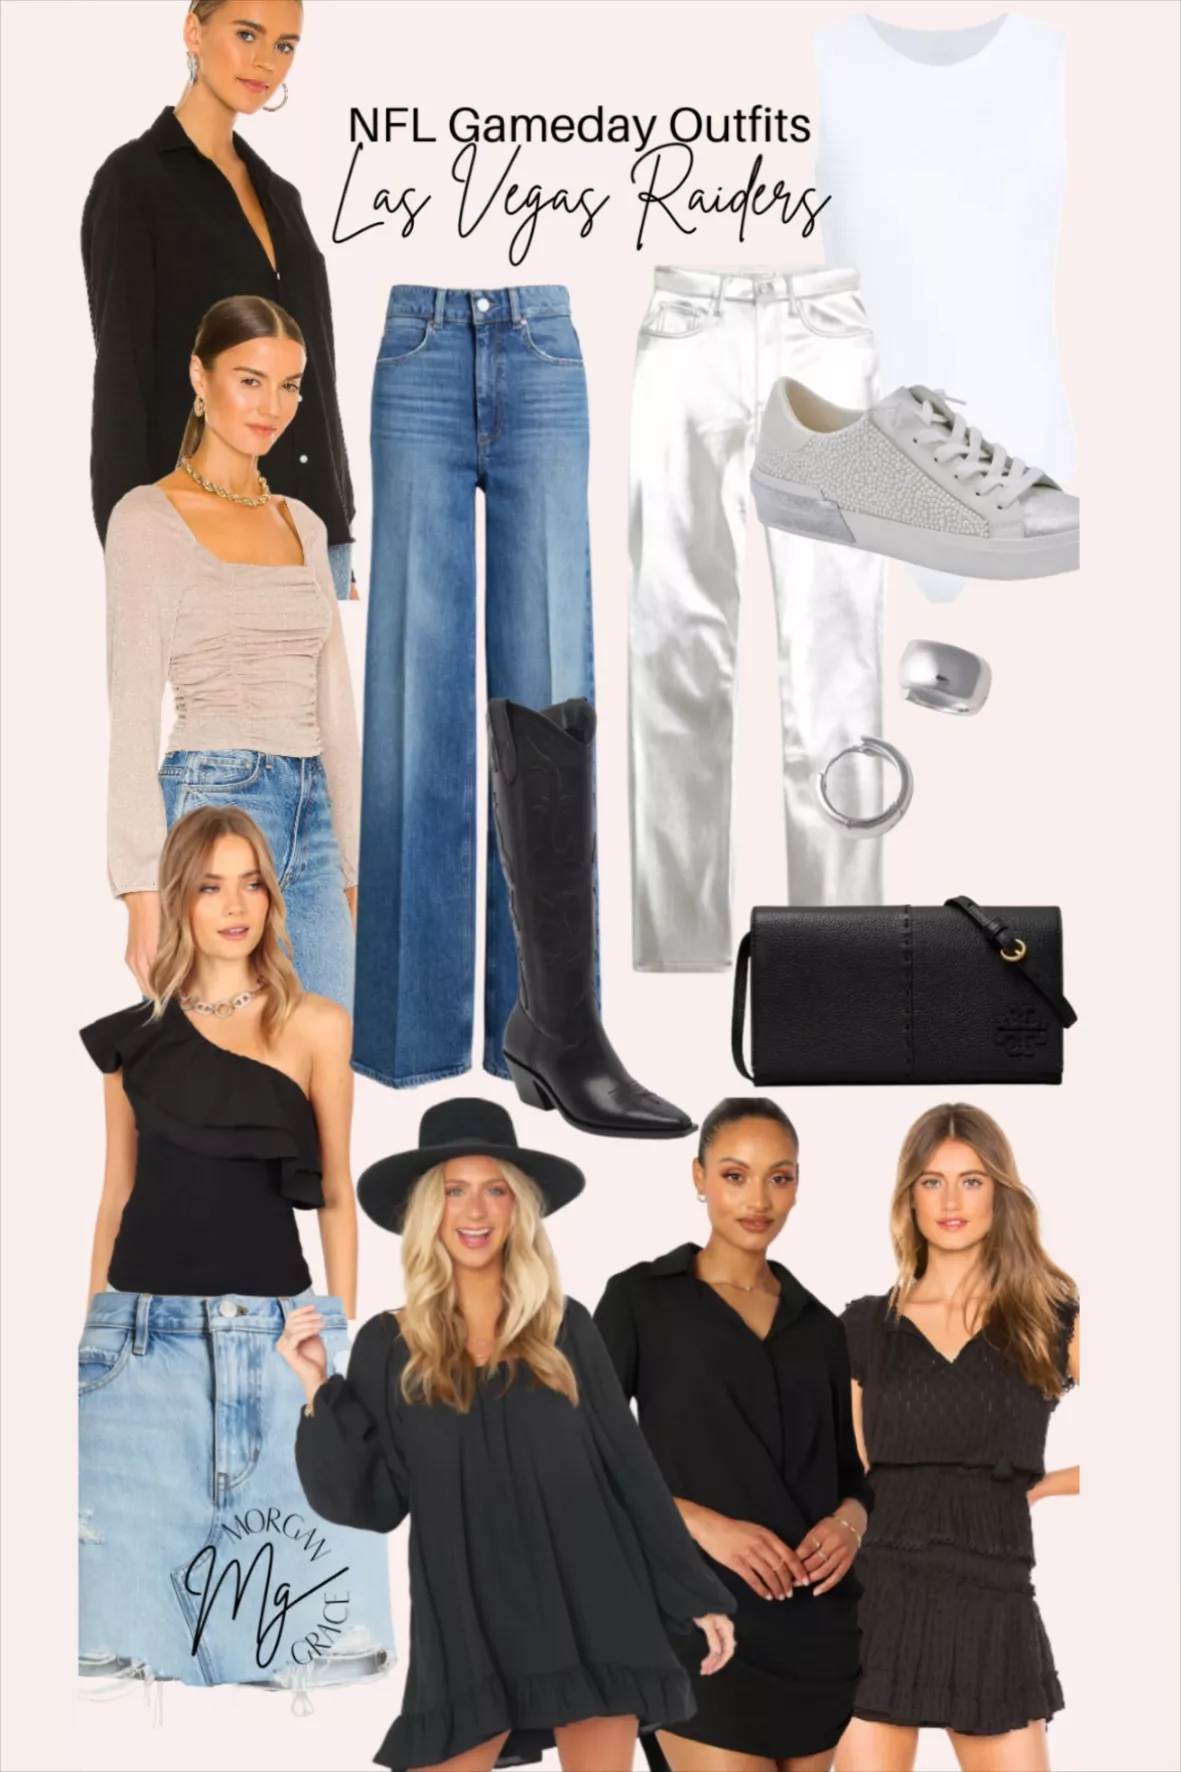 Las Vegas Raiders Game Day Outfit  Nfl outfits, Football game outfit,  Gameday outfit